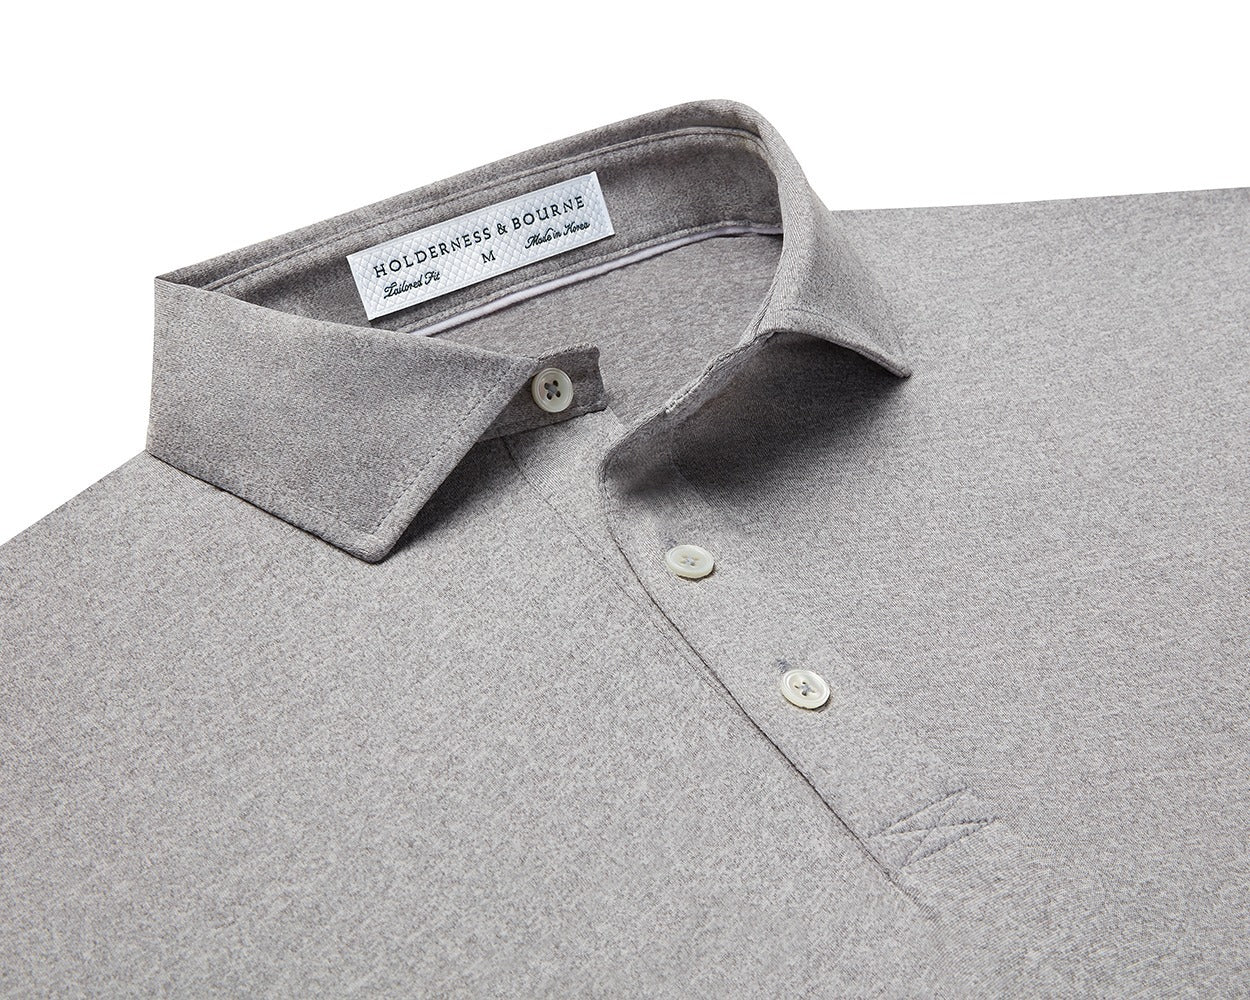 Folded Holderness and Bourne heathered gray polo.